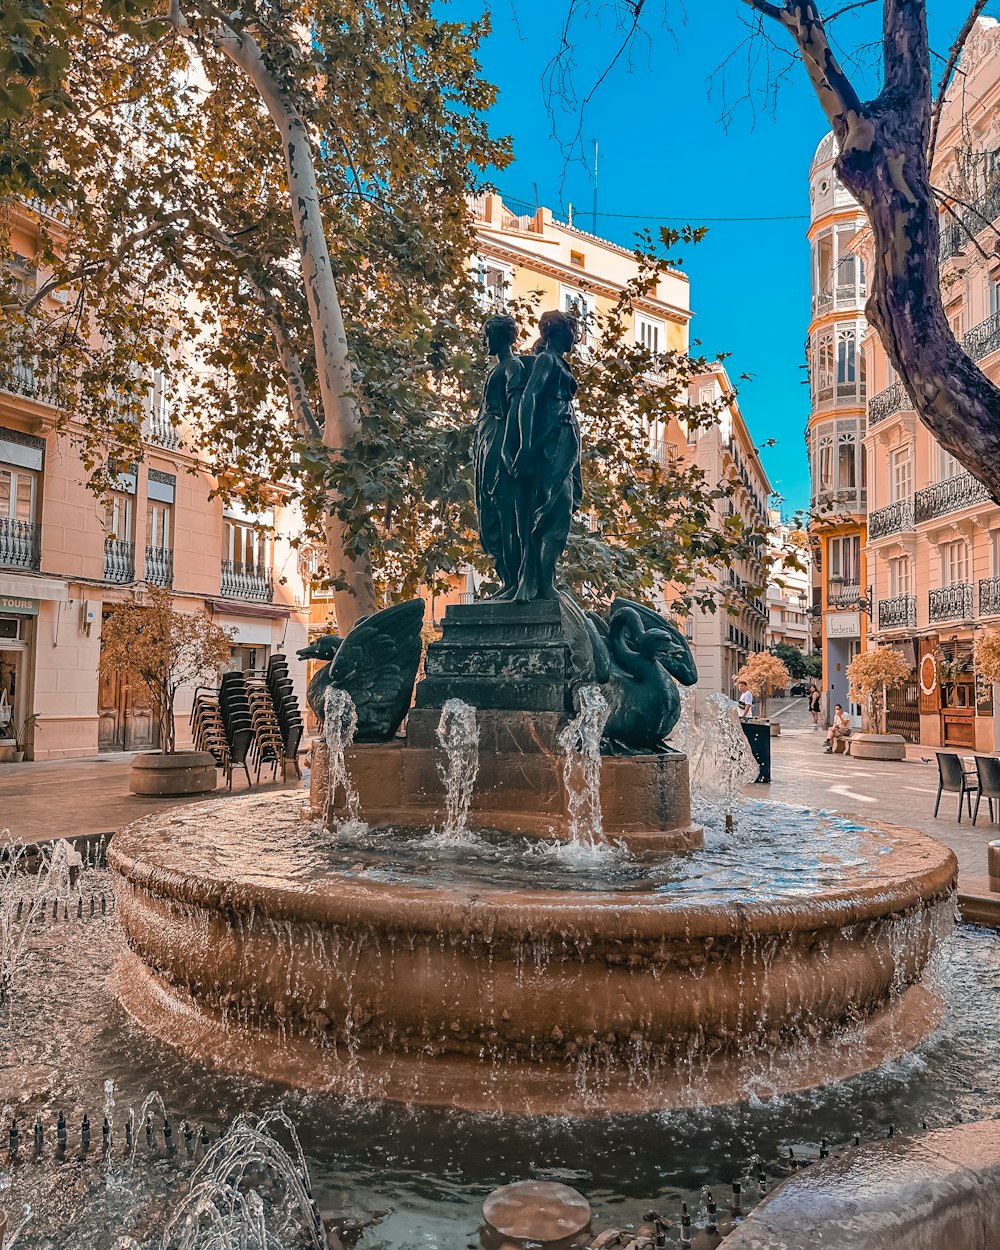 a fountain in the middle of a city square